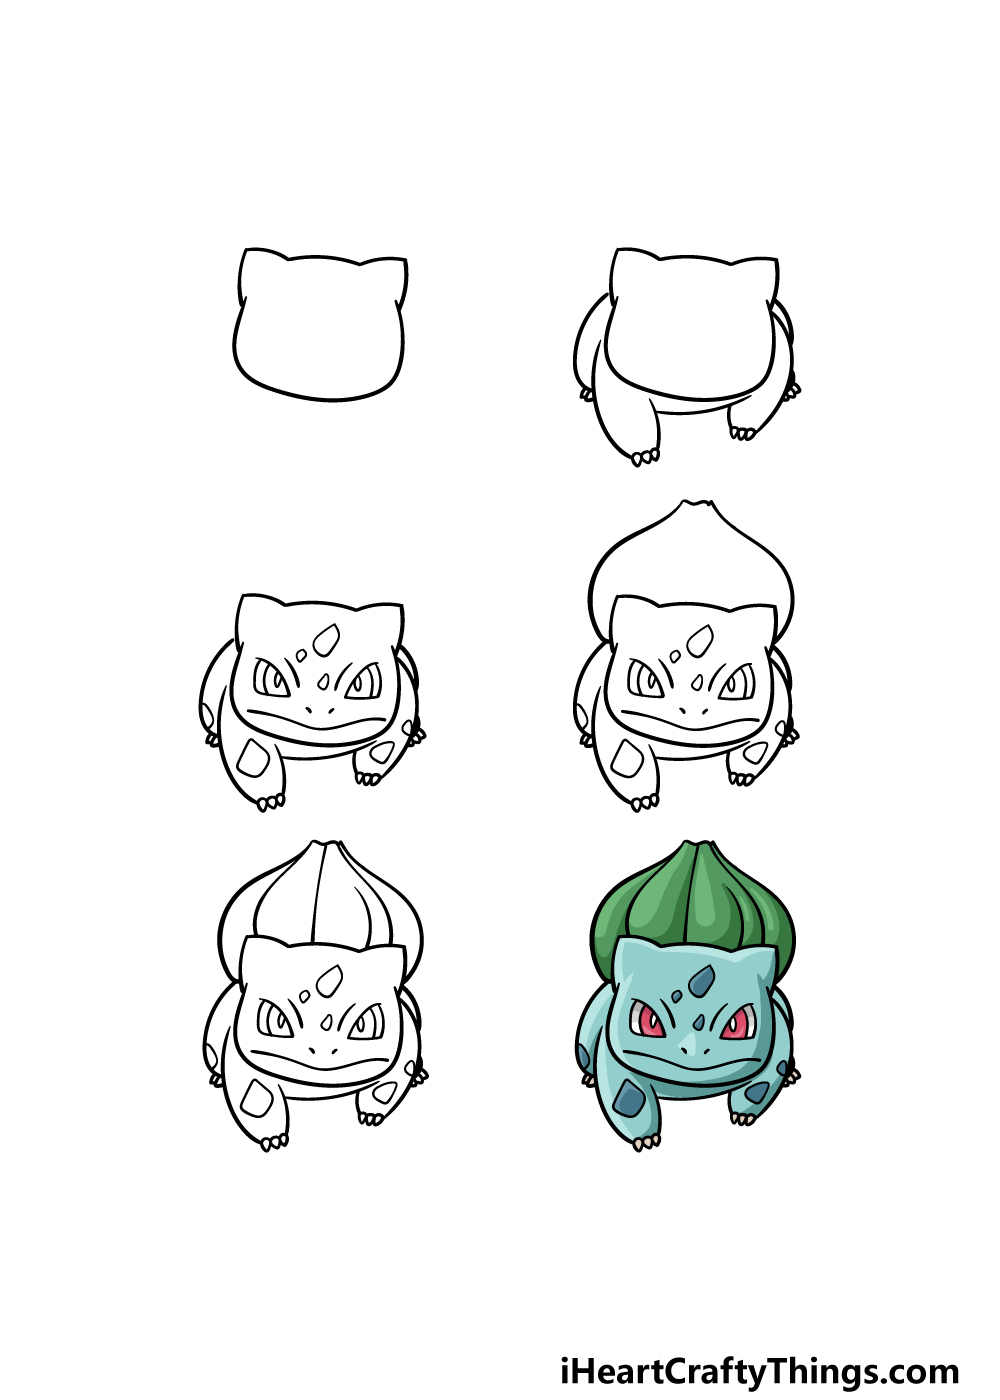 how to draw Bulbasaur in 6 steps